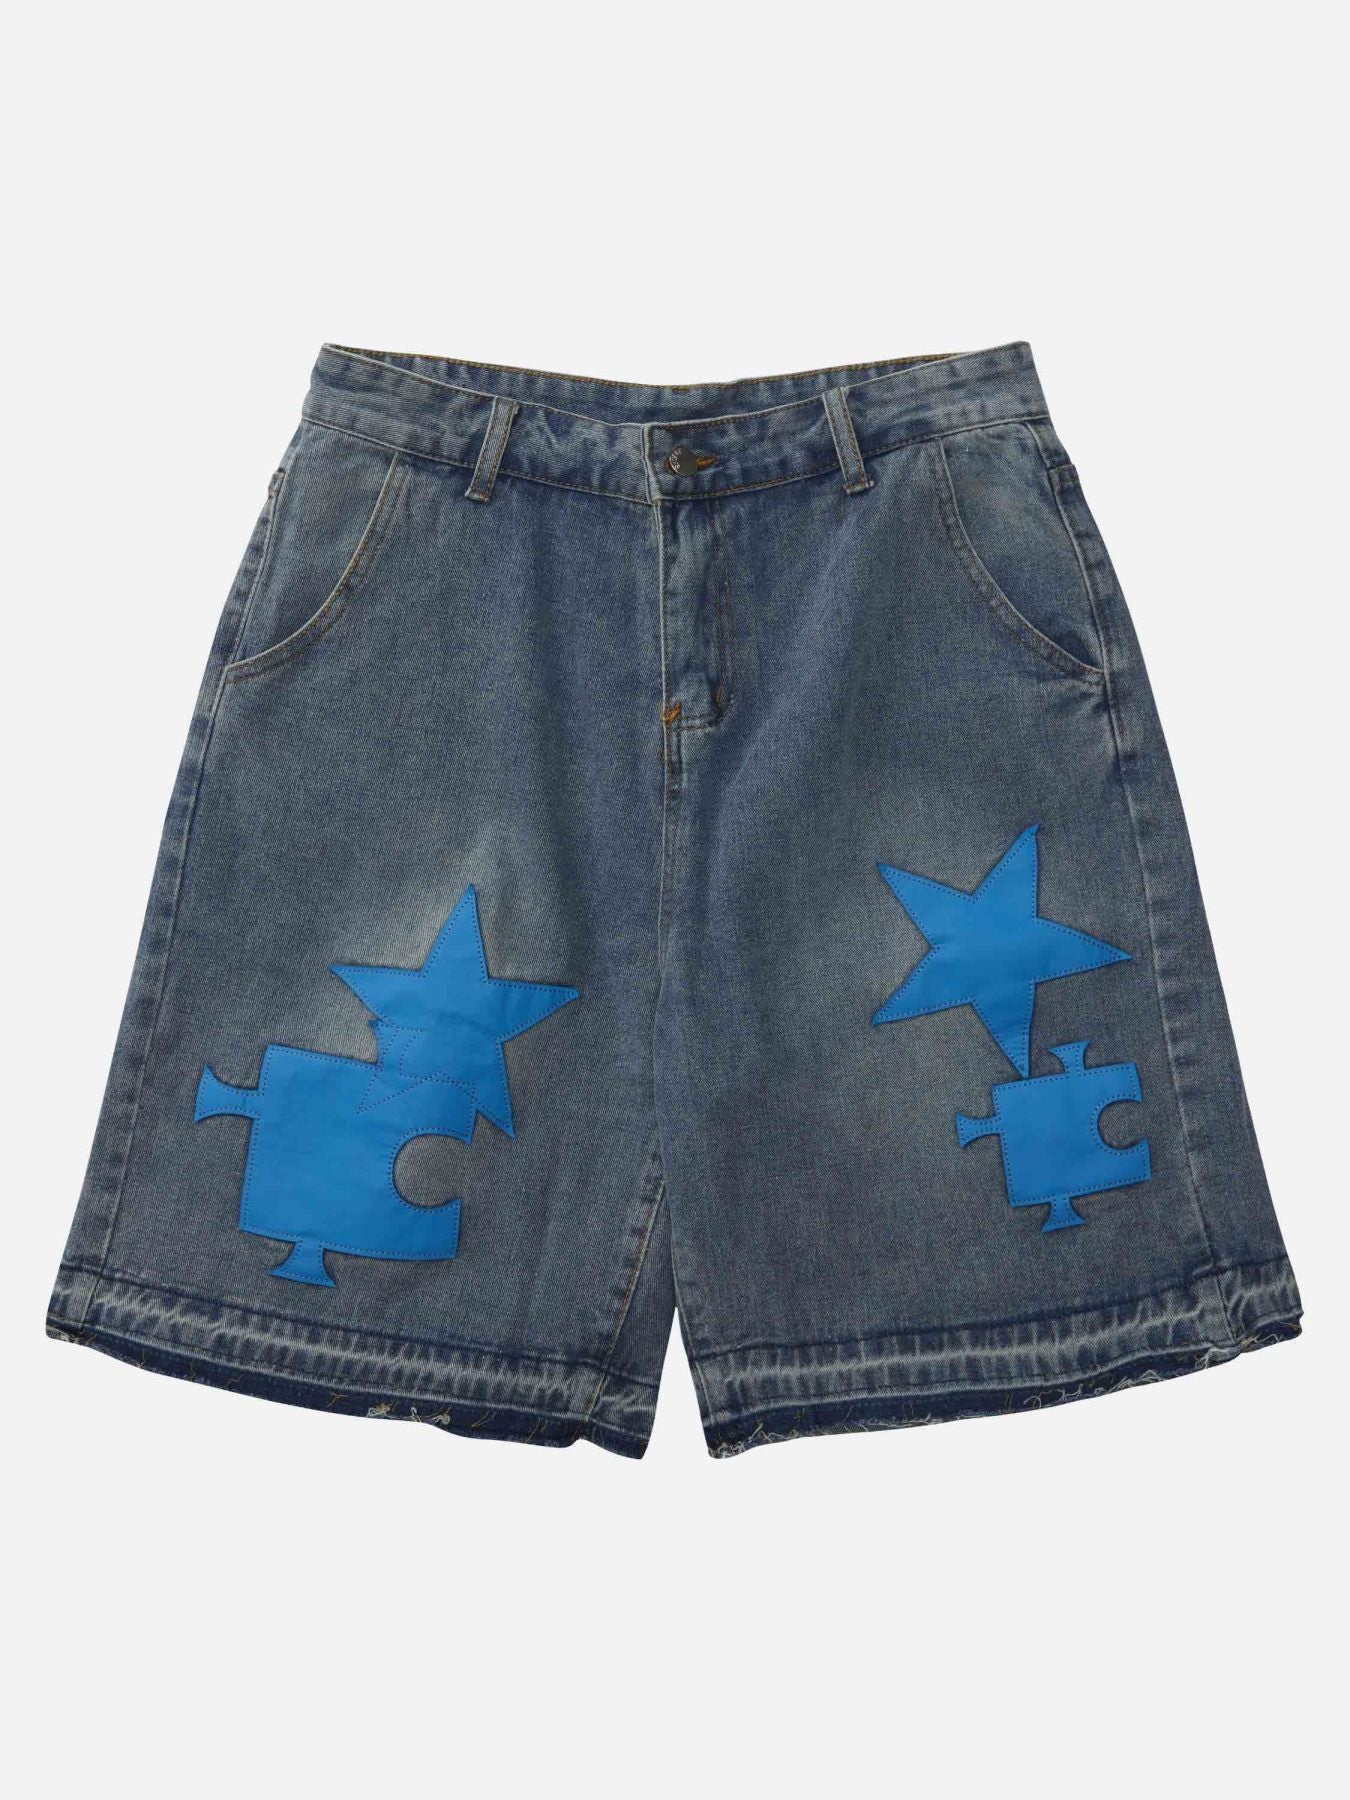 The Supermade Star Embroidered Denim Shorts